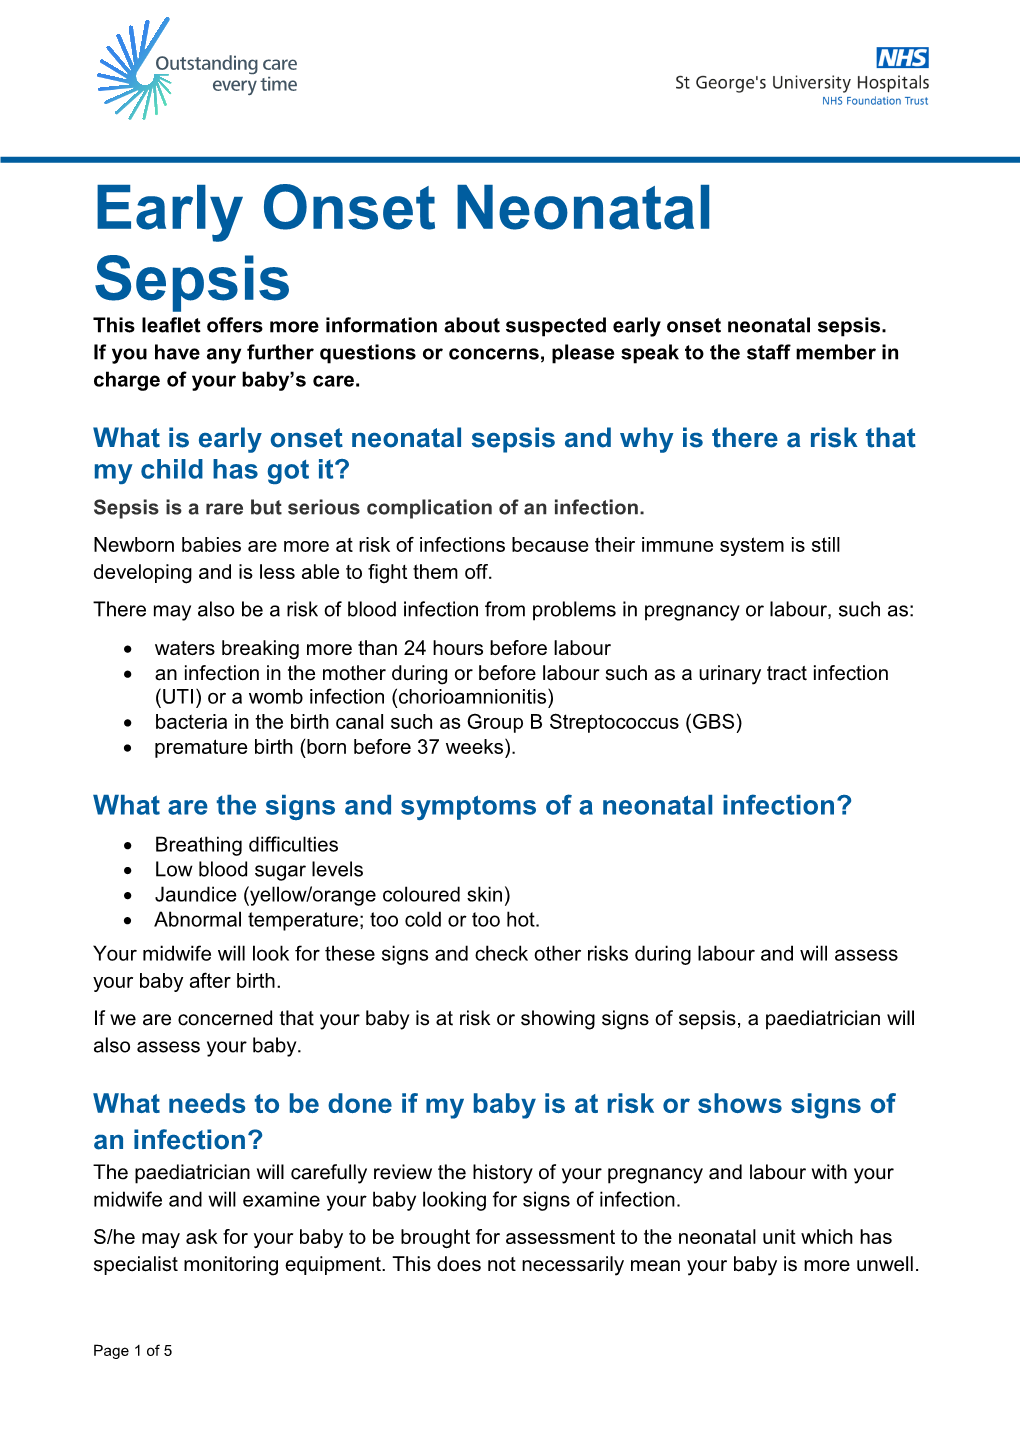 Early Onset Neonatal Sepsis This Leaflet Offers More Information About Suspected Early Onset Neonatal Sepsis